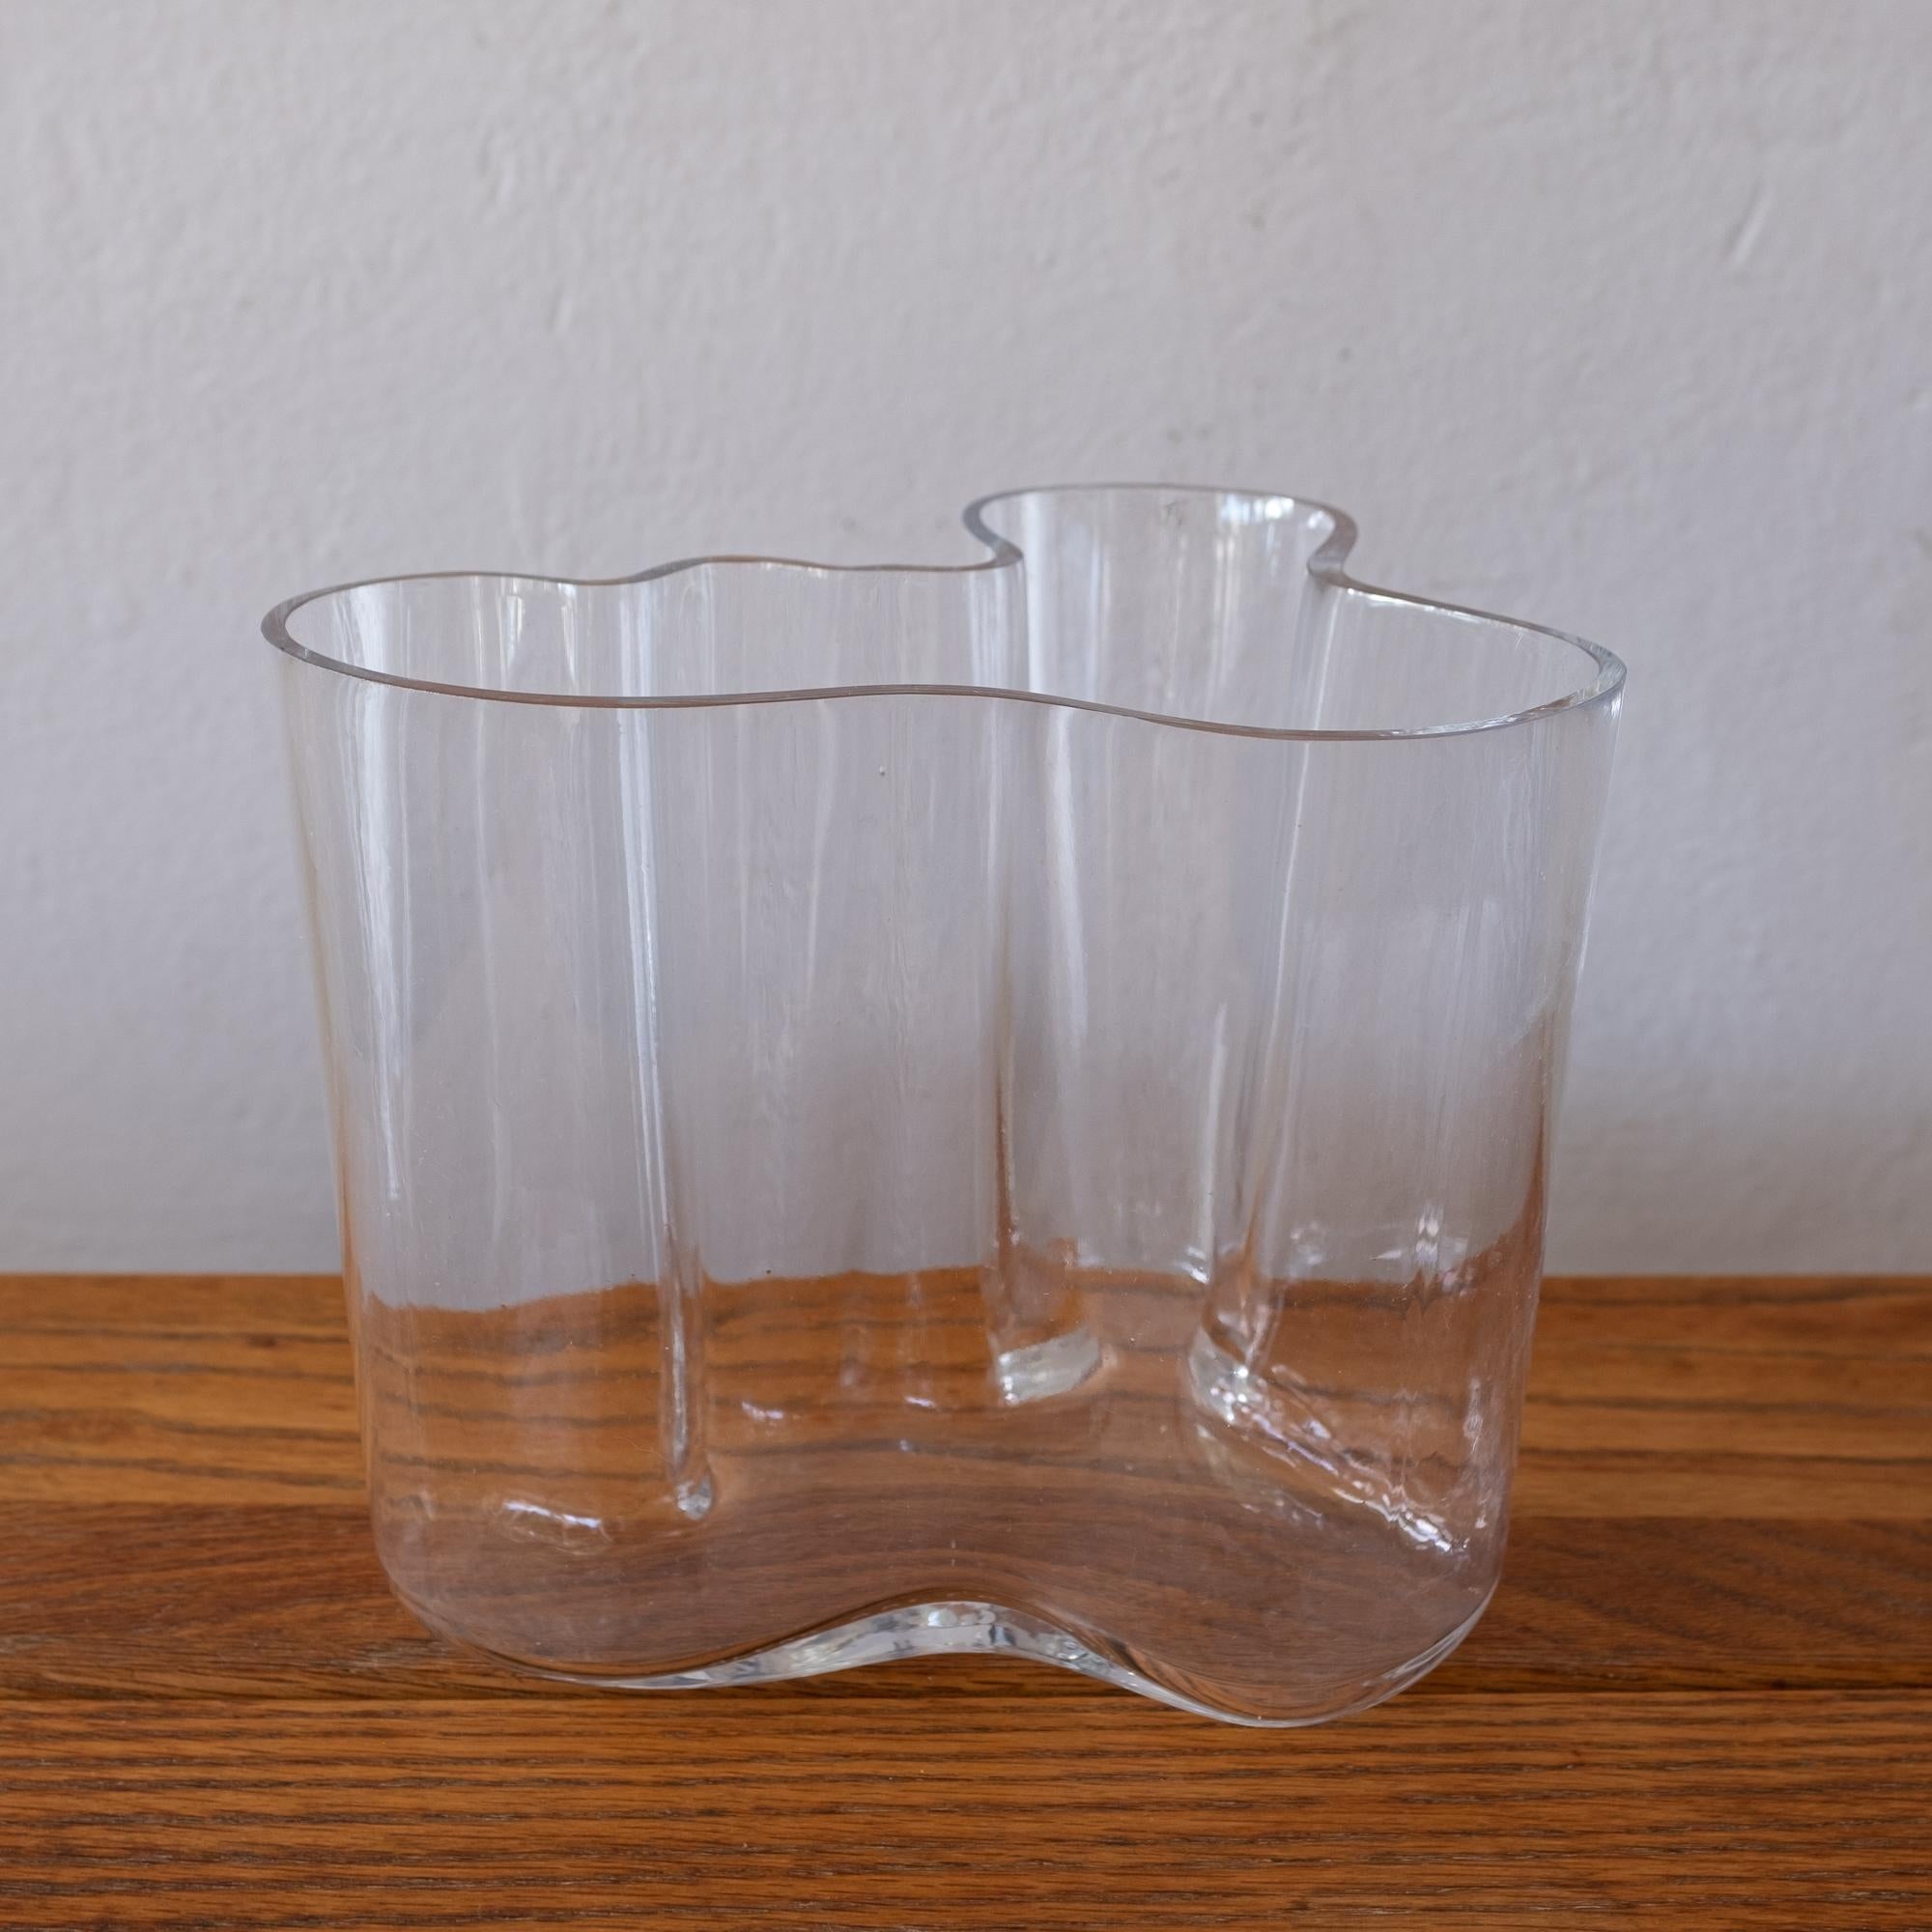 Early Savoy glass vase by Alvar Aalto. Hand signed and numbered 3030. Finland, 1940s.